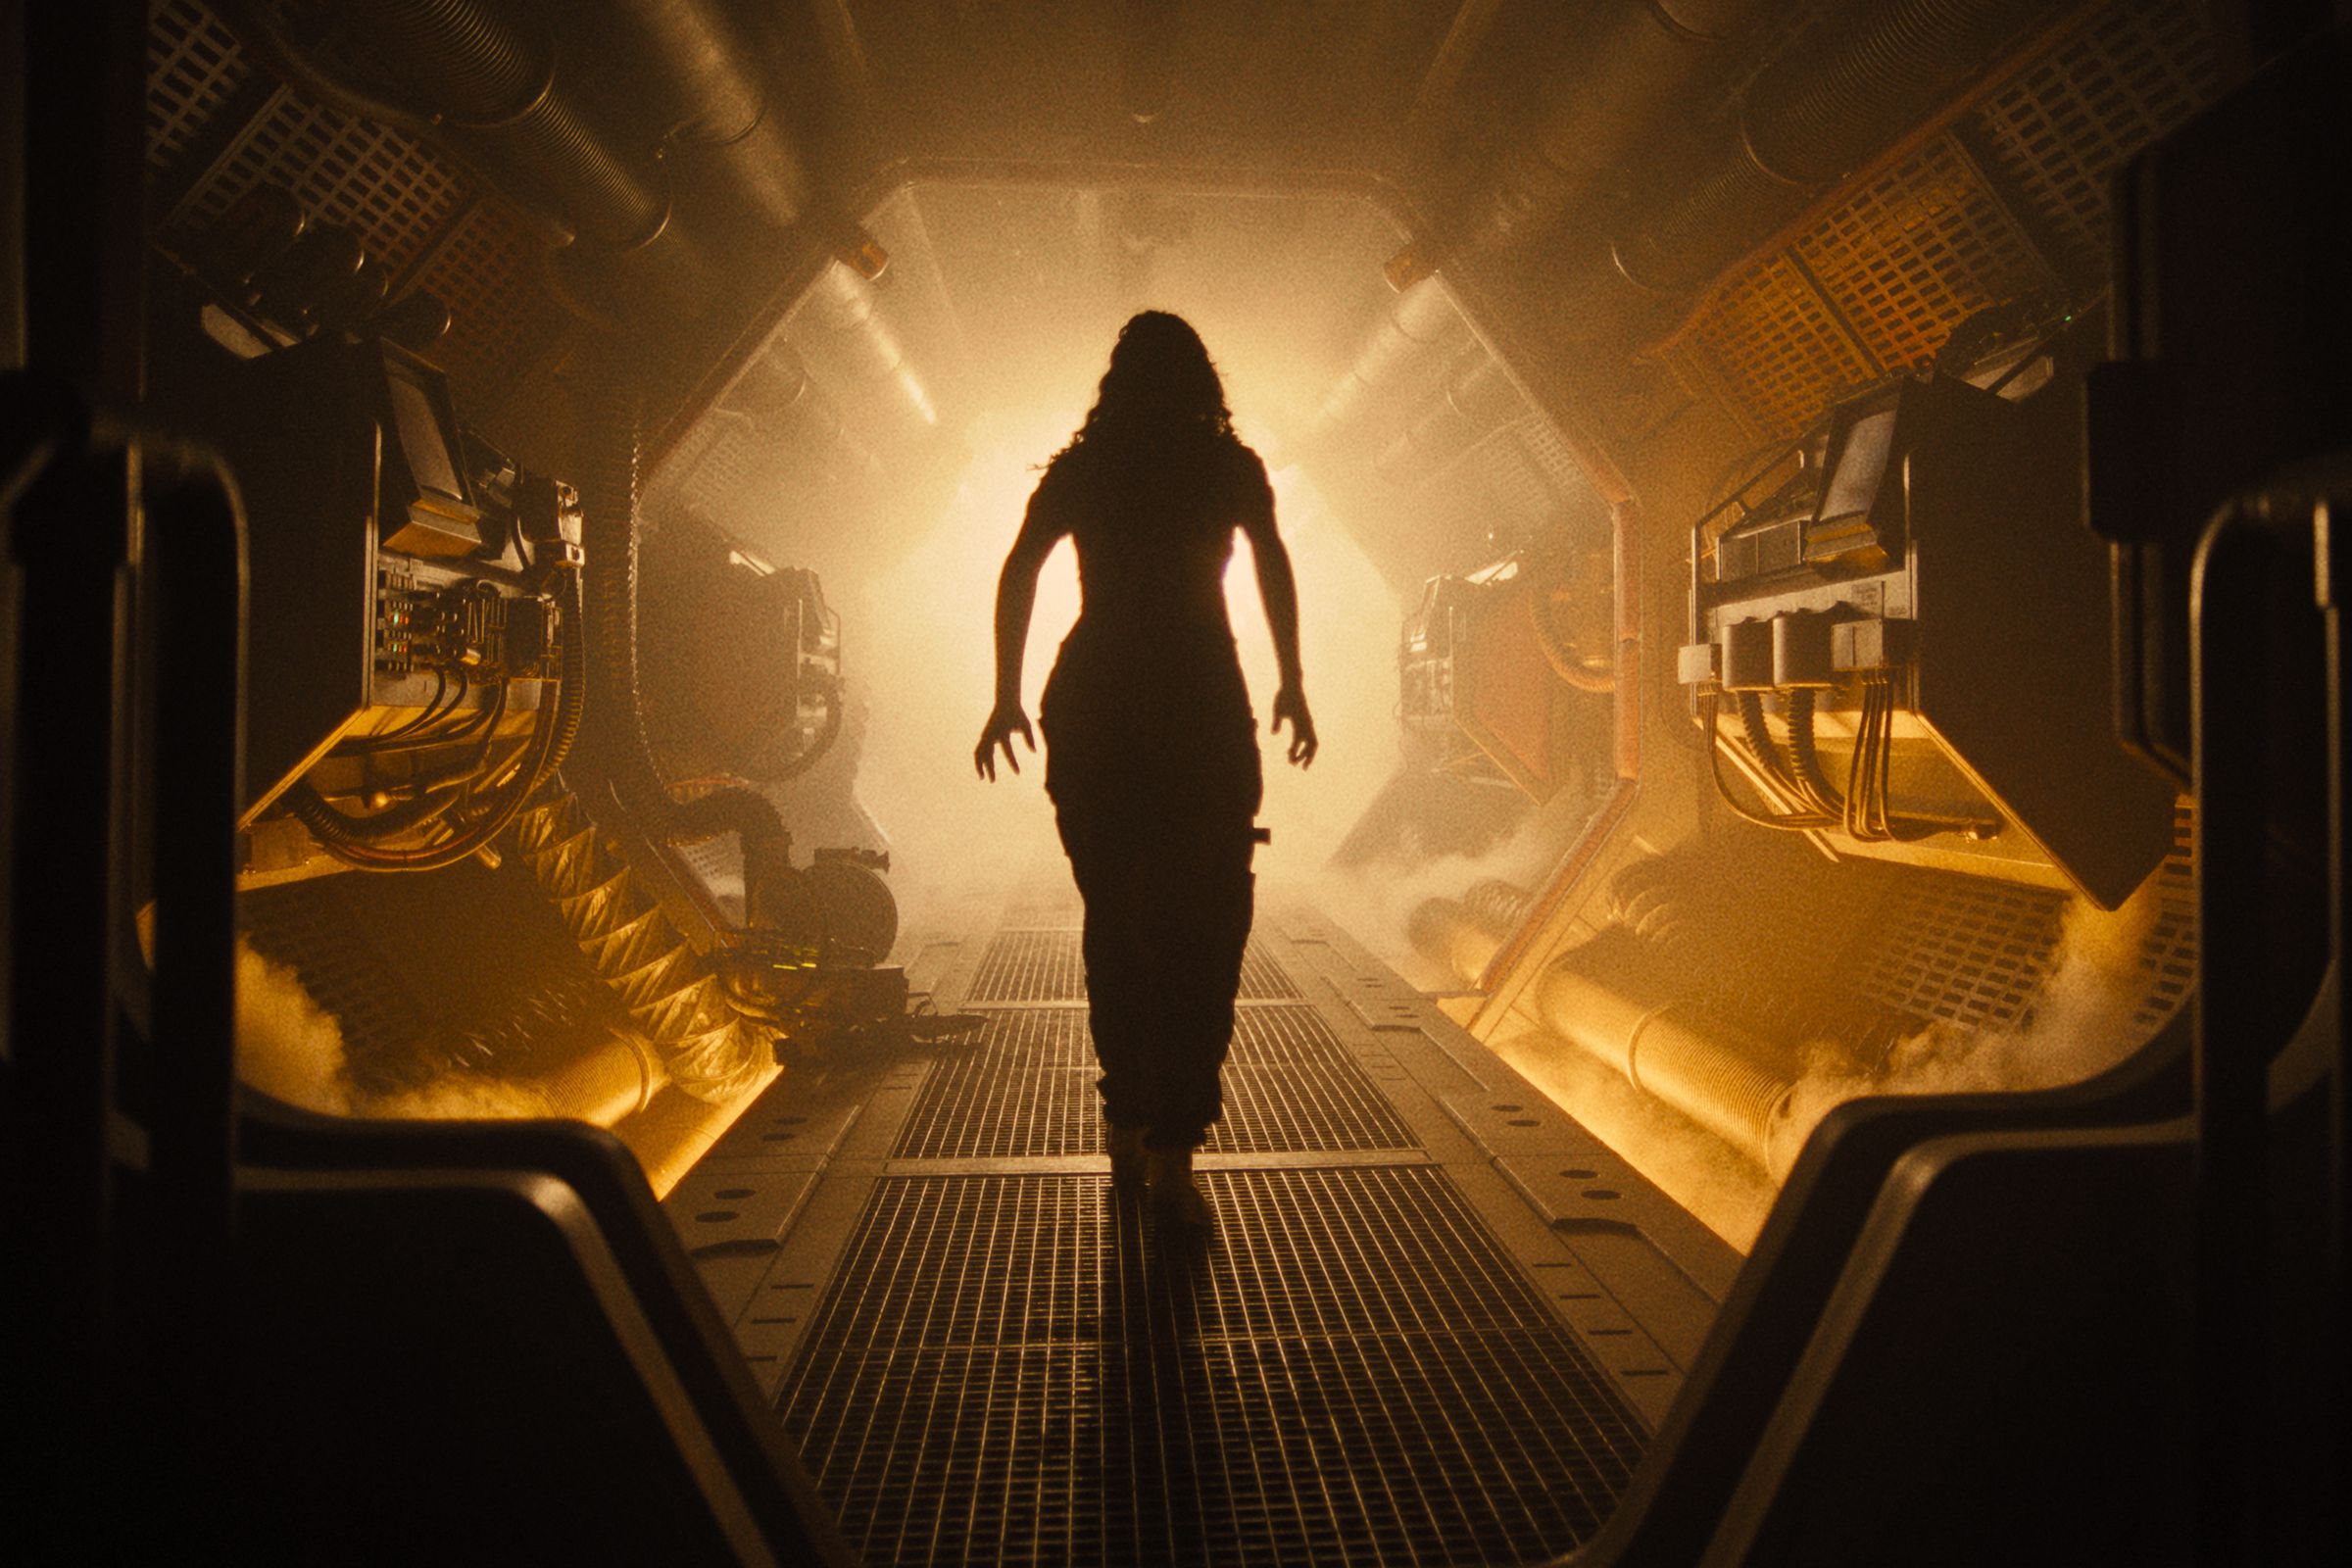 A still image from the sci-fi film Alien: Romulus.